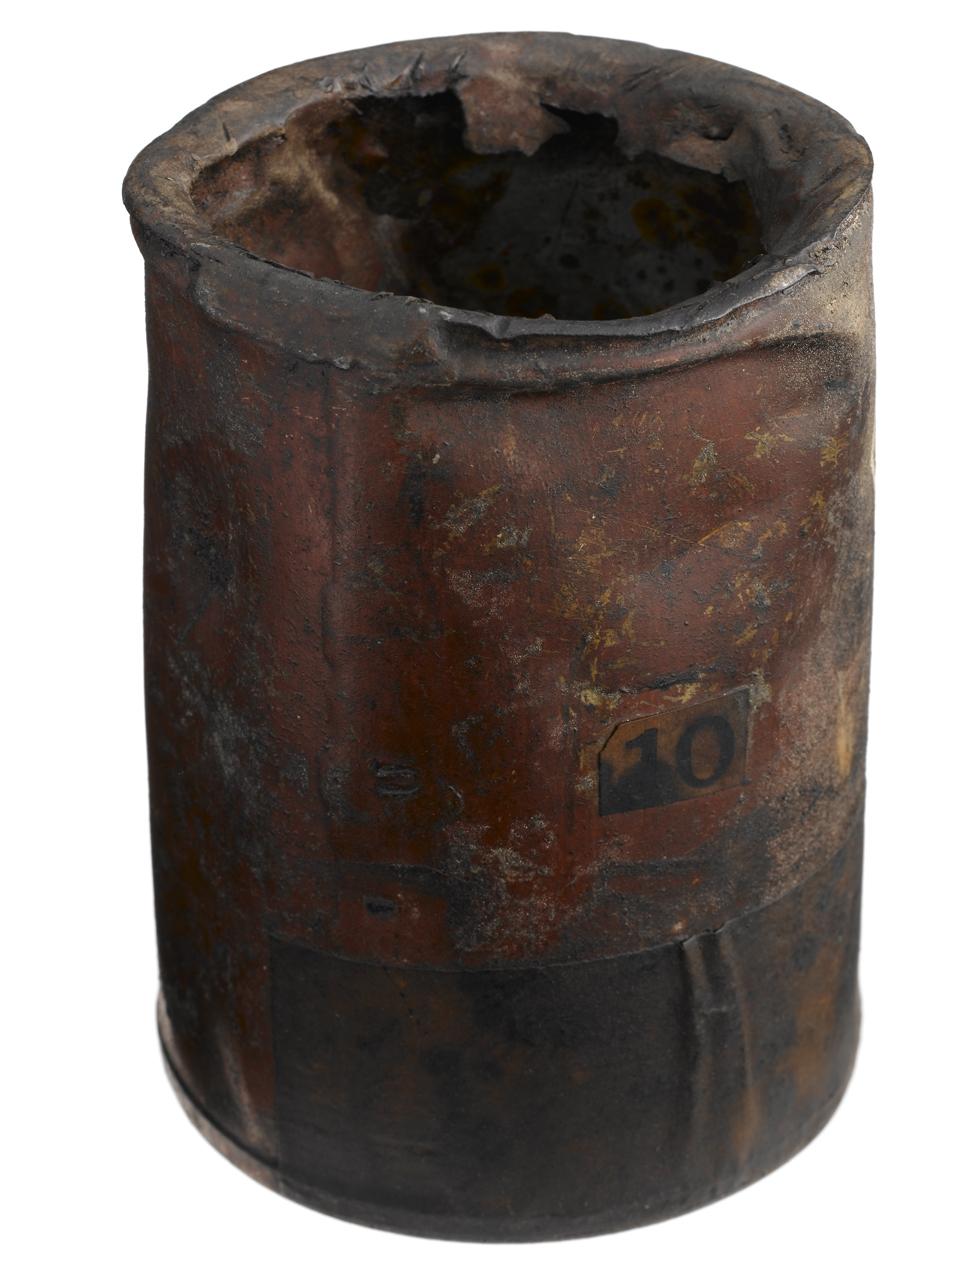 Soup tin found in the Arctic, a remnant of Franklin's expedition